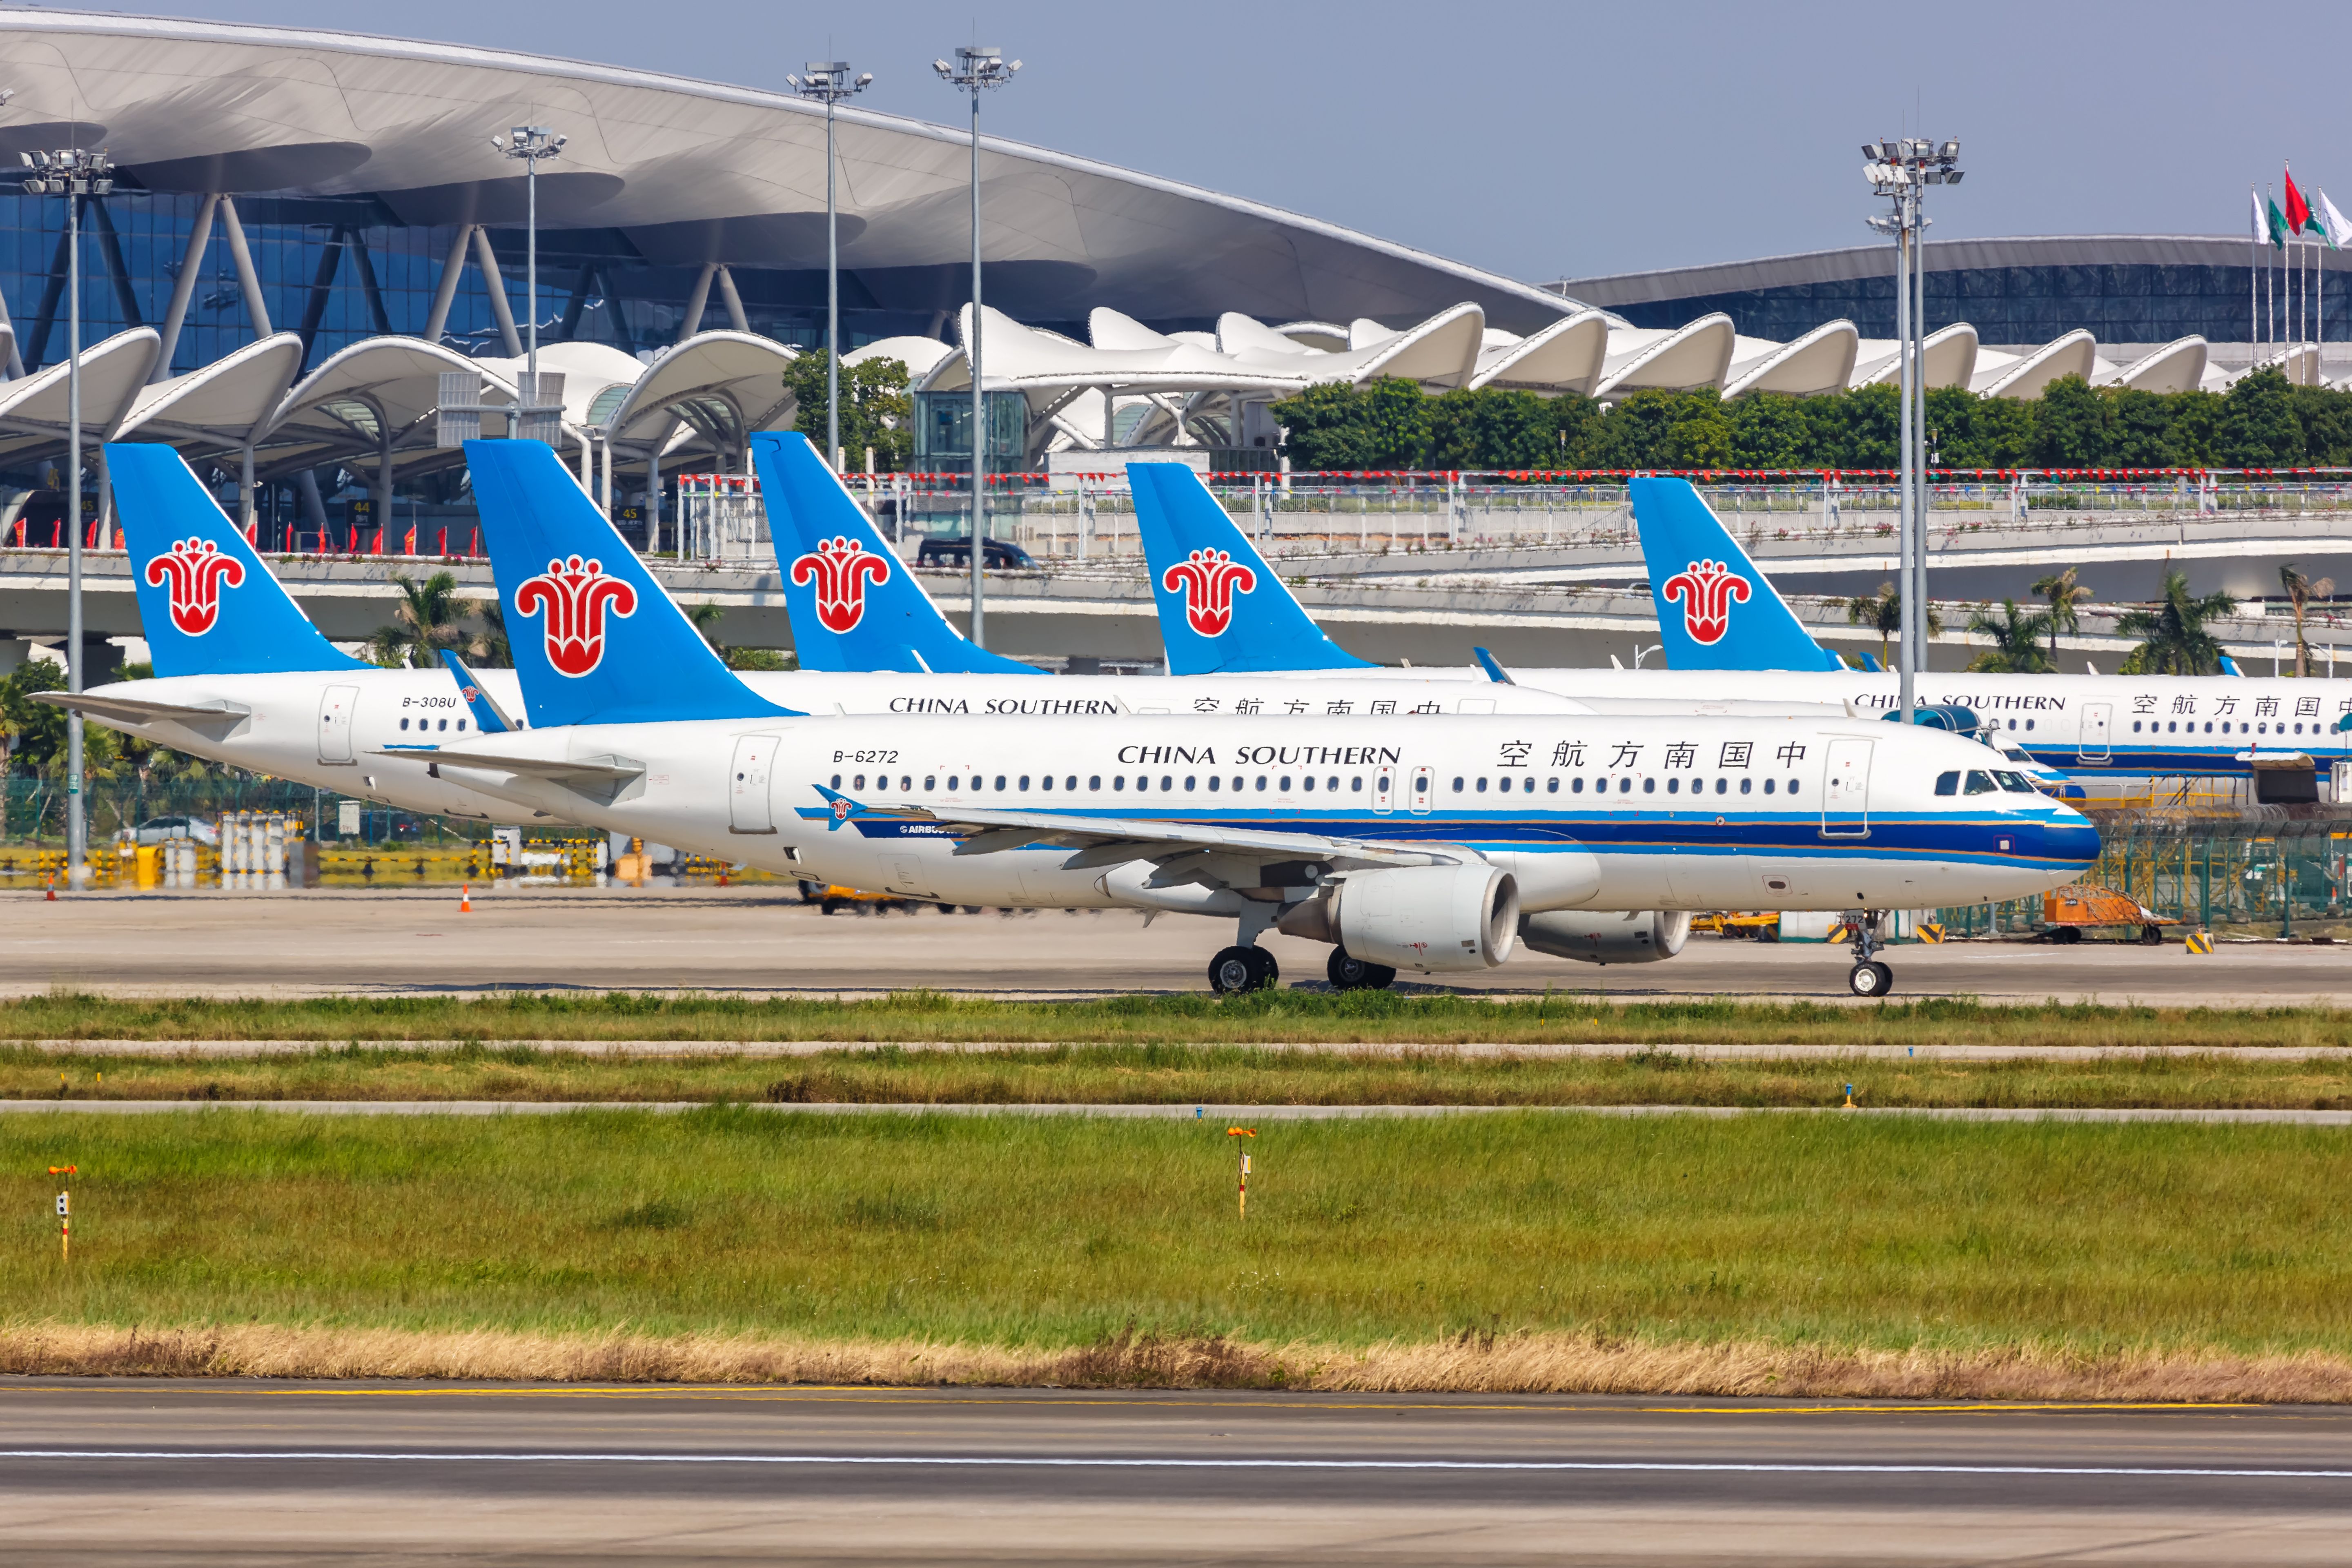 September_24_2019_China_Southern_Airlines_Airbus_ A320_at_Guangzhou_Baiyun_airport_(CAN)_1755972437